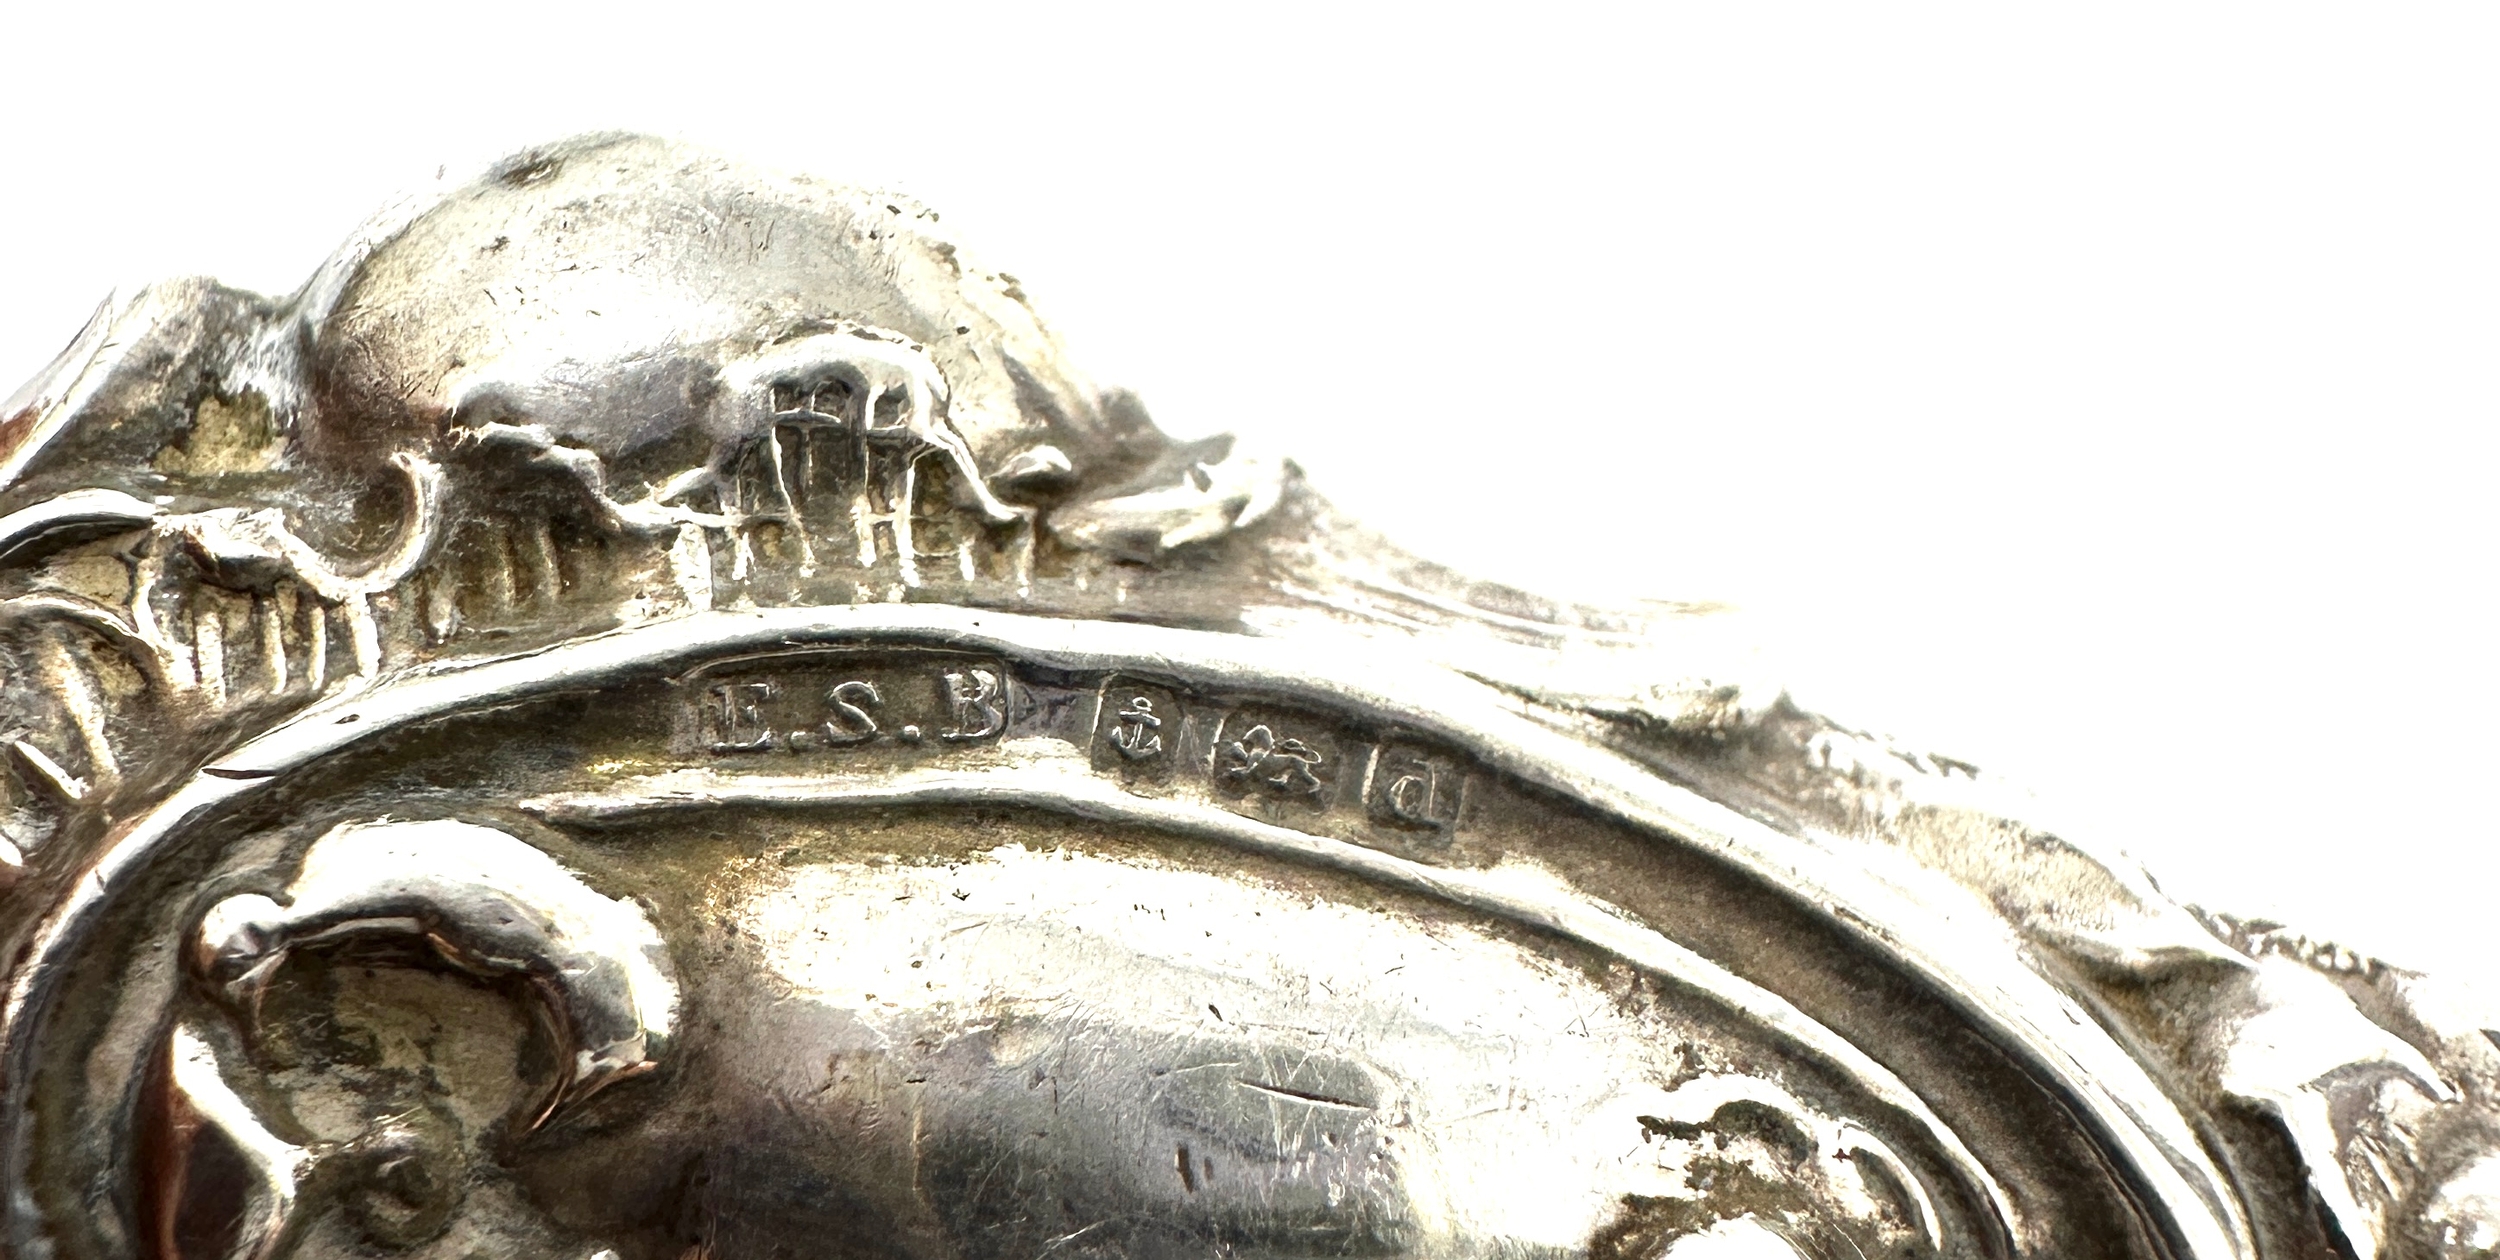 Antique silver hallmarked handle nut crackers - Image 3 of 3